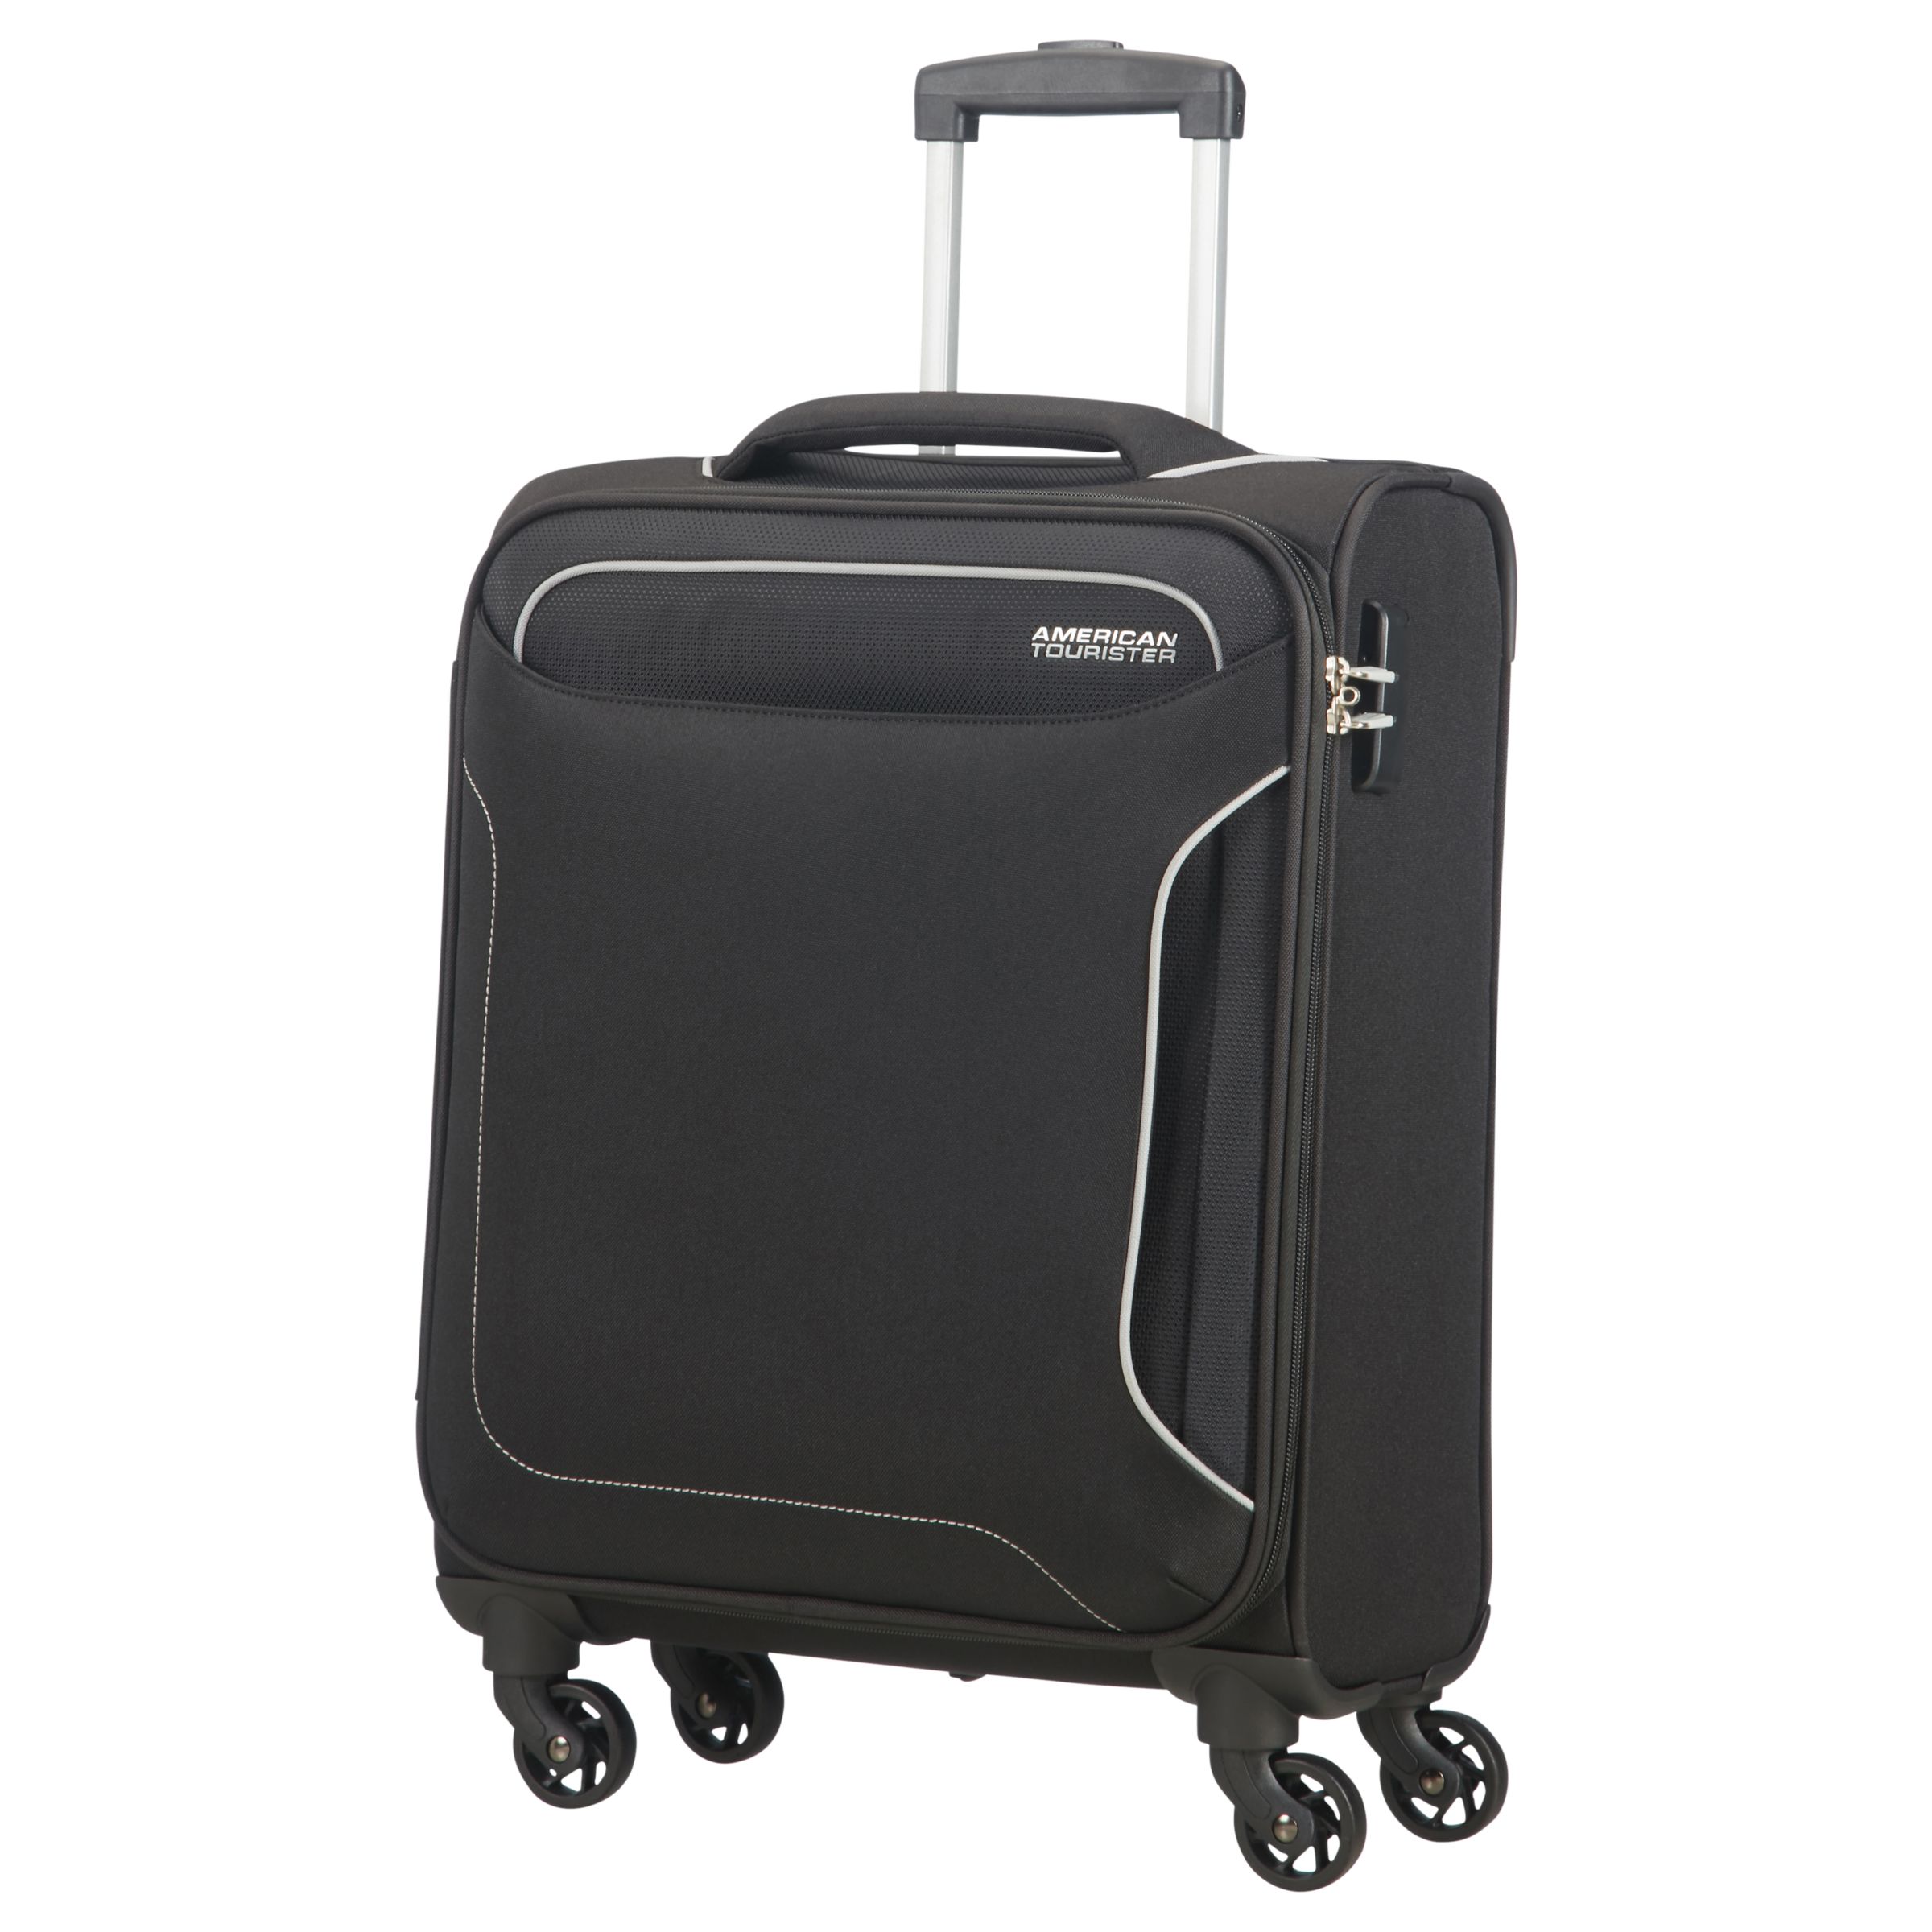 American Tourister Holiday Heat 4-Spinner 55cm Cabin Suitcase at John Lewis & Partners